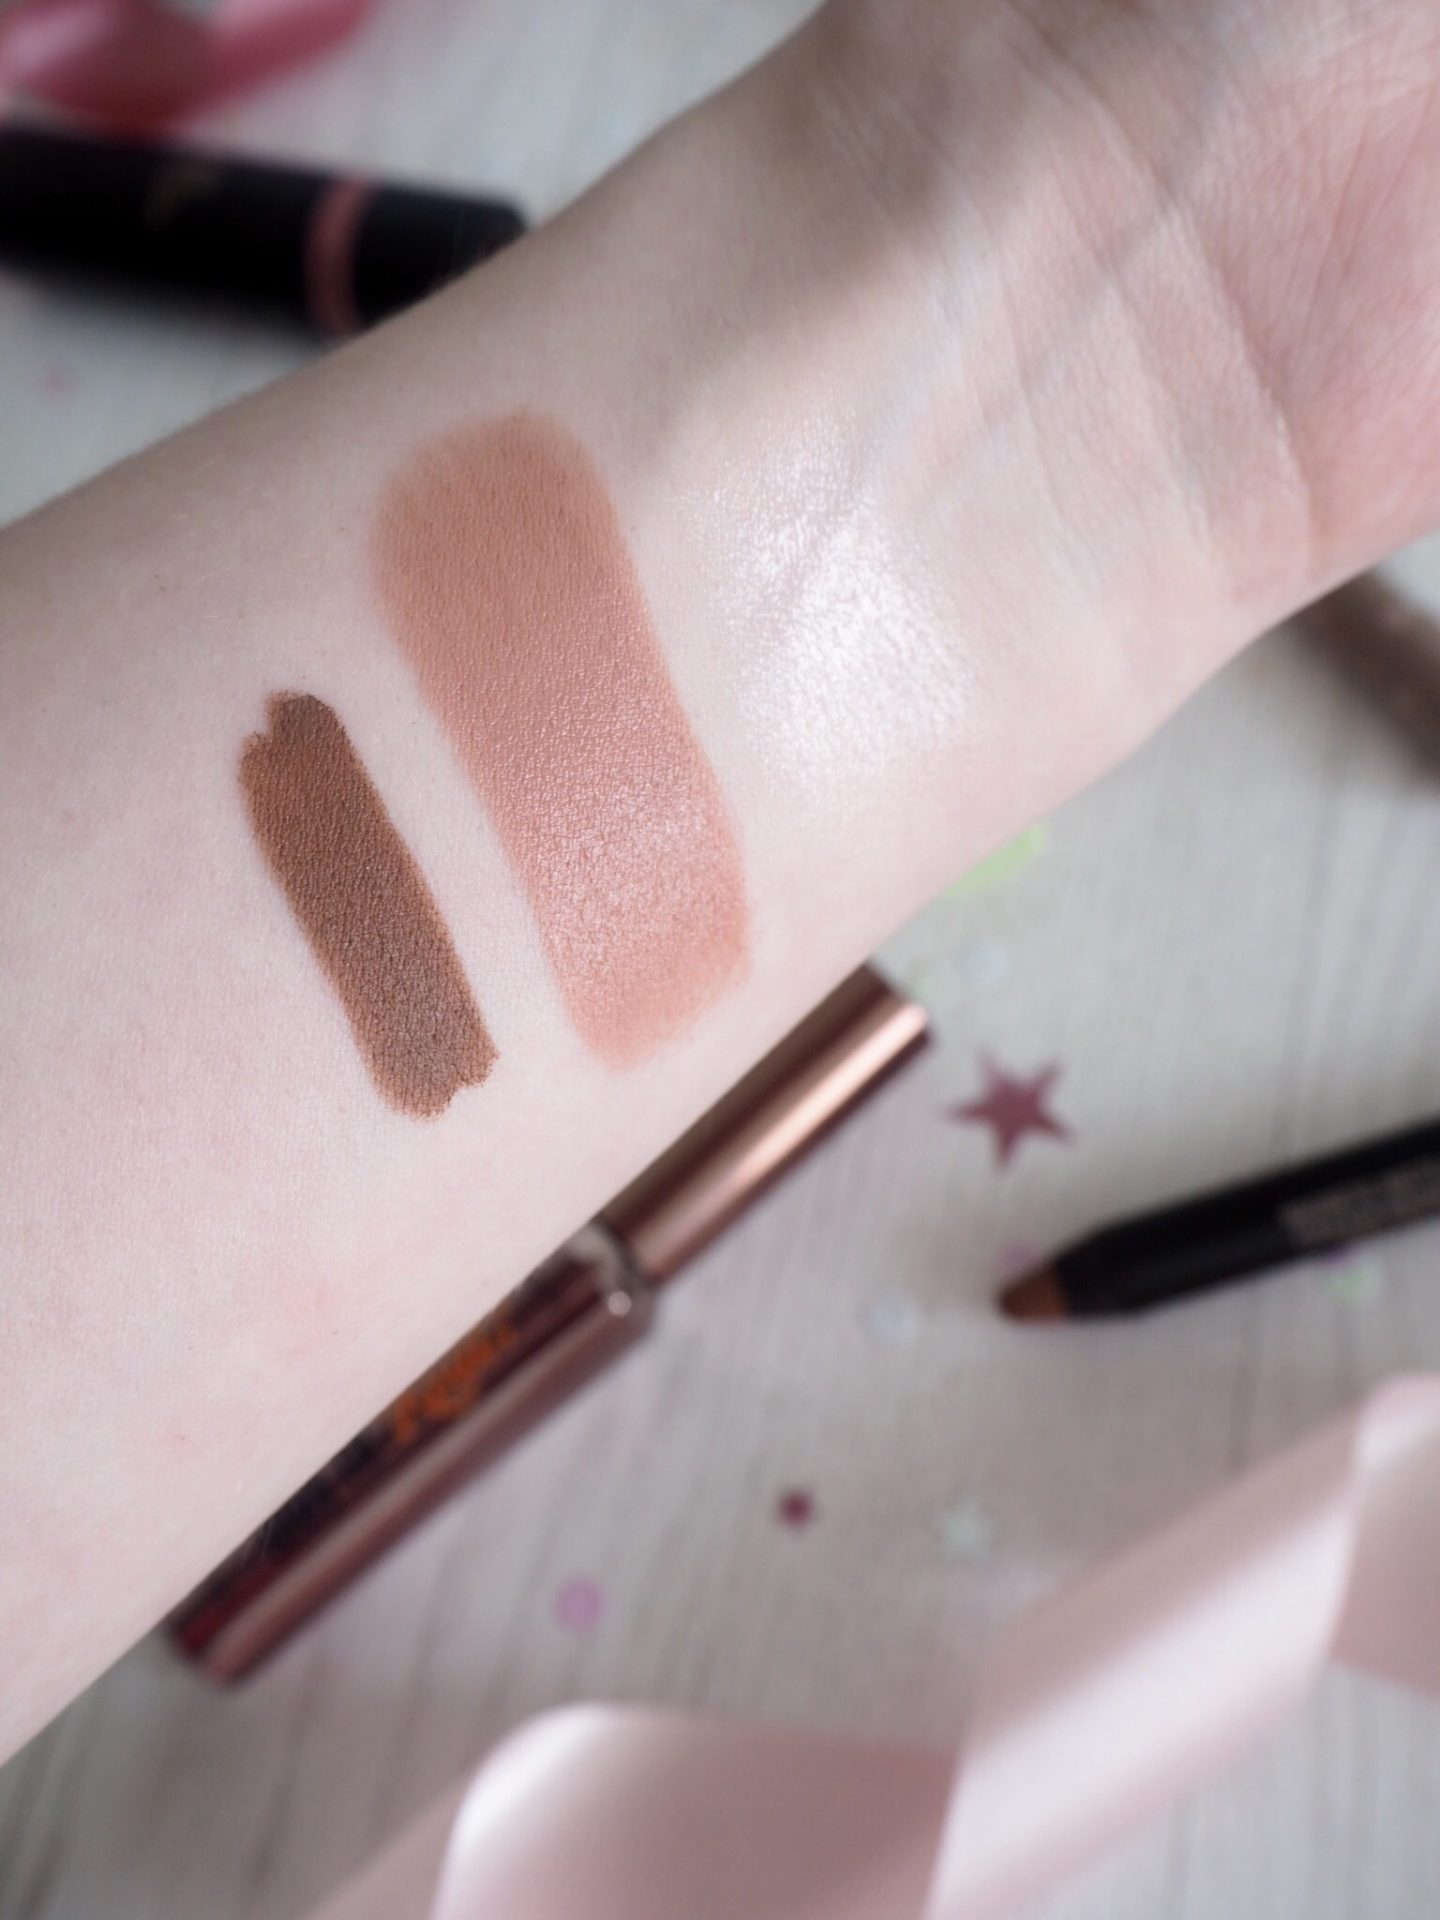 5 minute makeup routine swatches